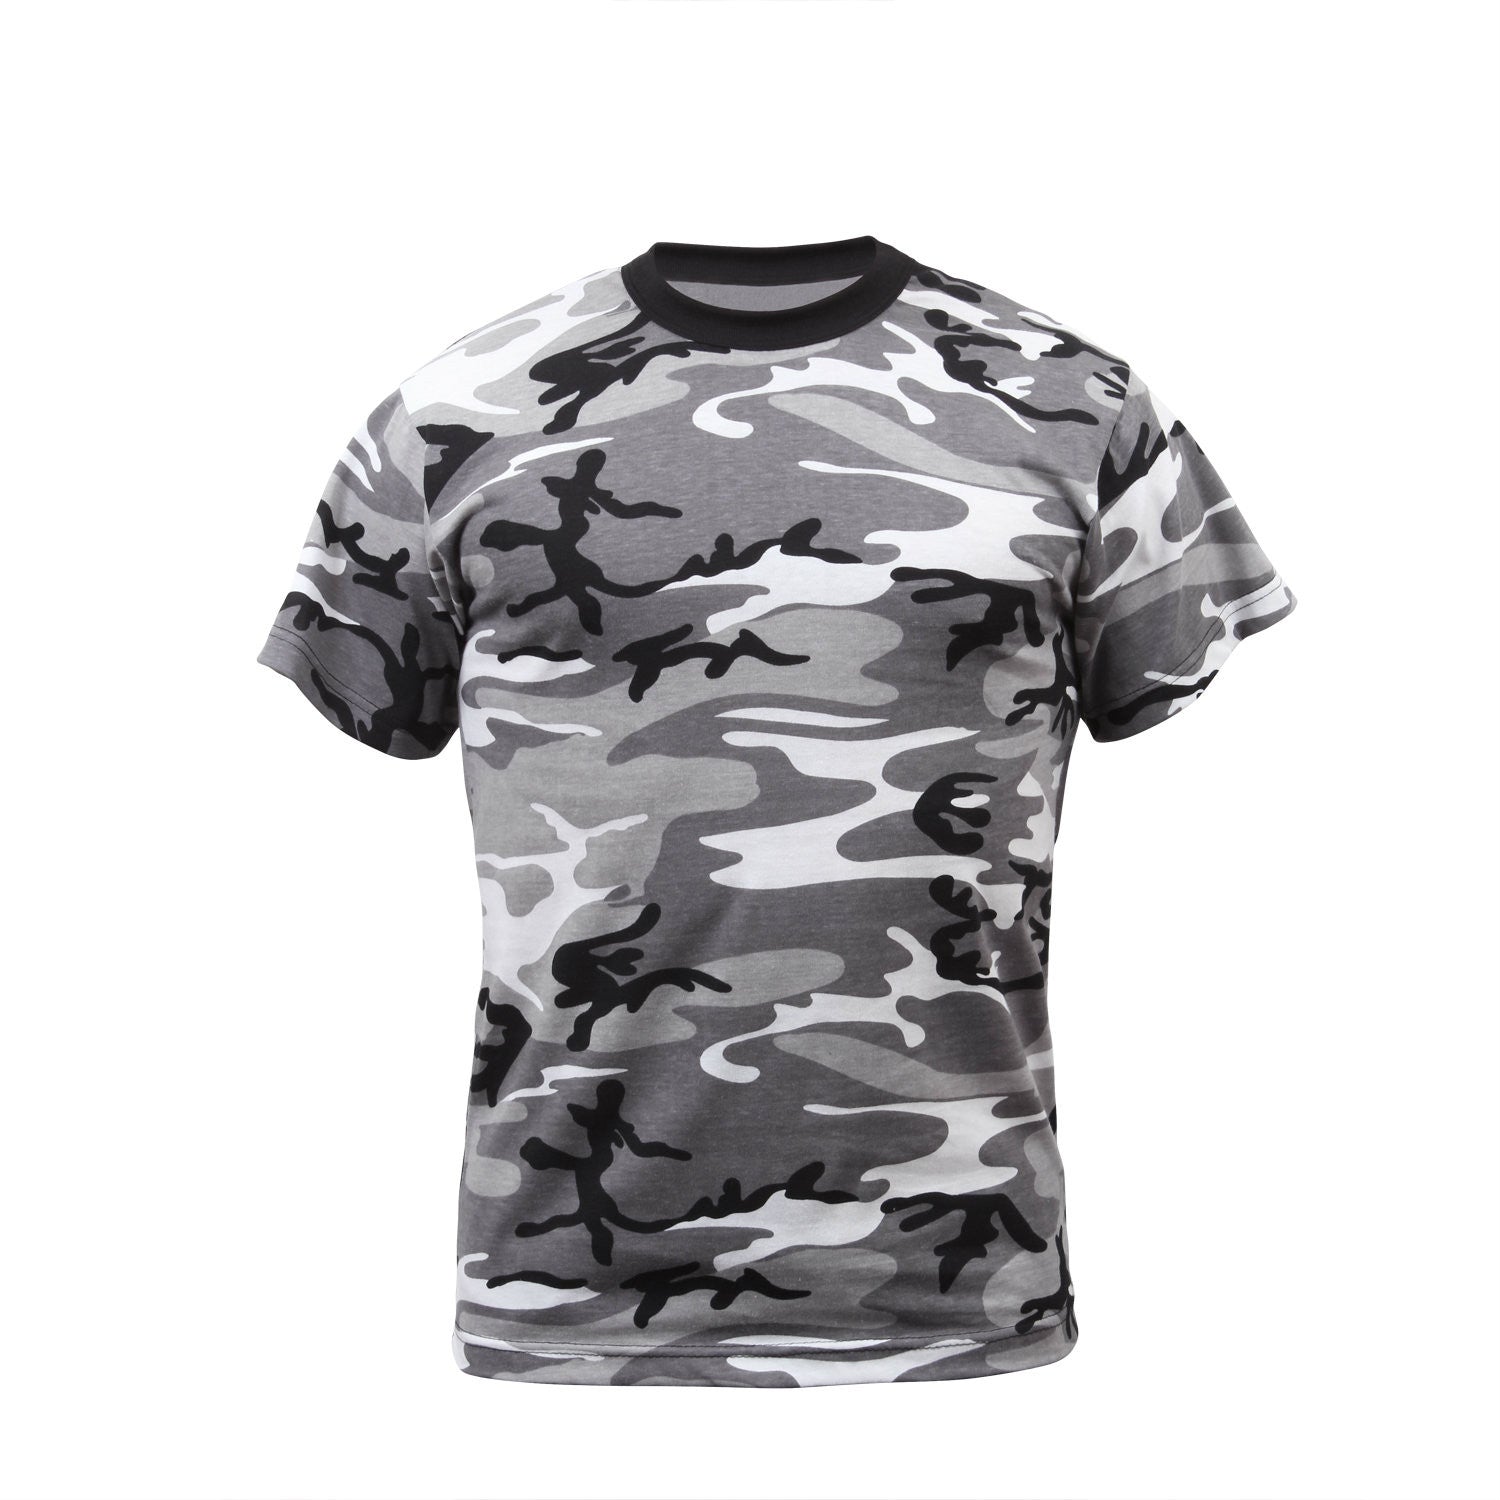 City Camouflage T-Shirt